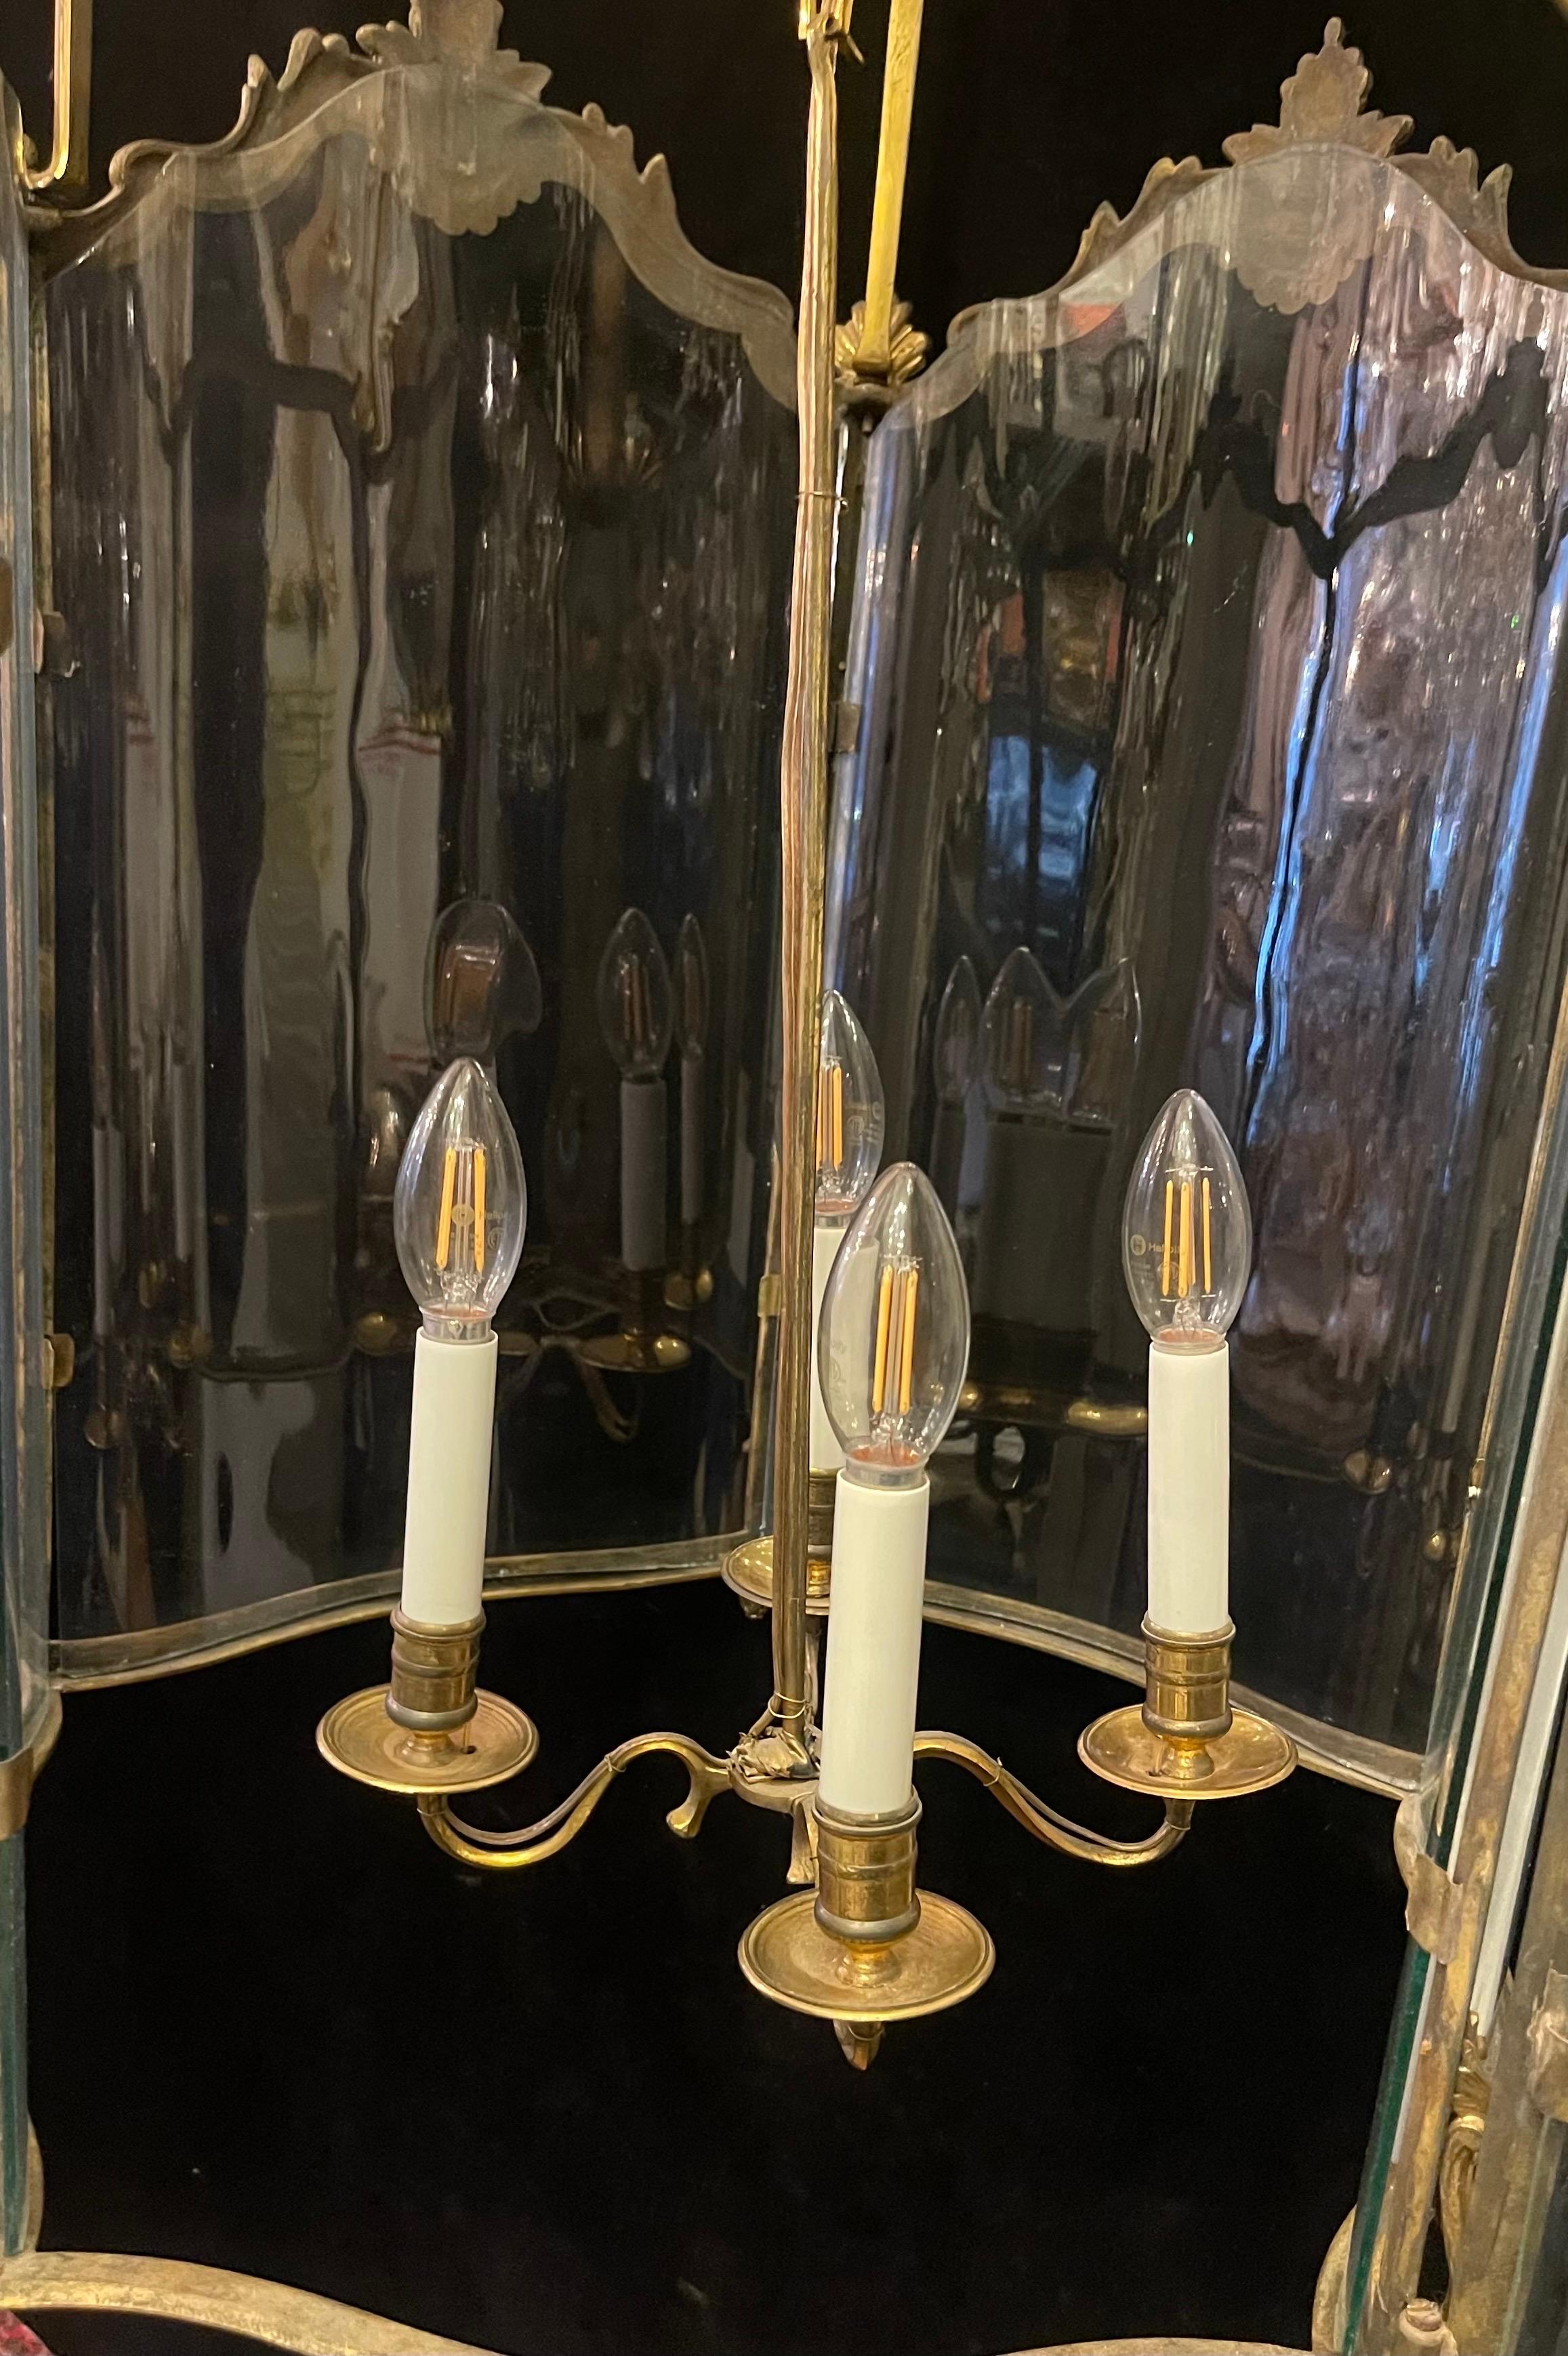 A Wonderful Large French Dore Bronze Rococo Louis XV Style With Original Bent / Curved Blown Glass 4 Candelabra Light Lantern Chandelier Fixture

Recently Rewired And Comes With Chain And Canopy